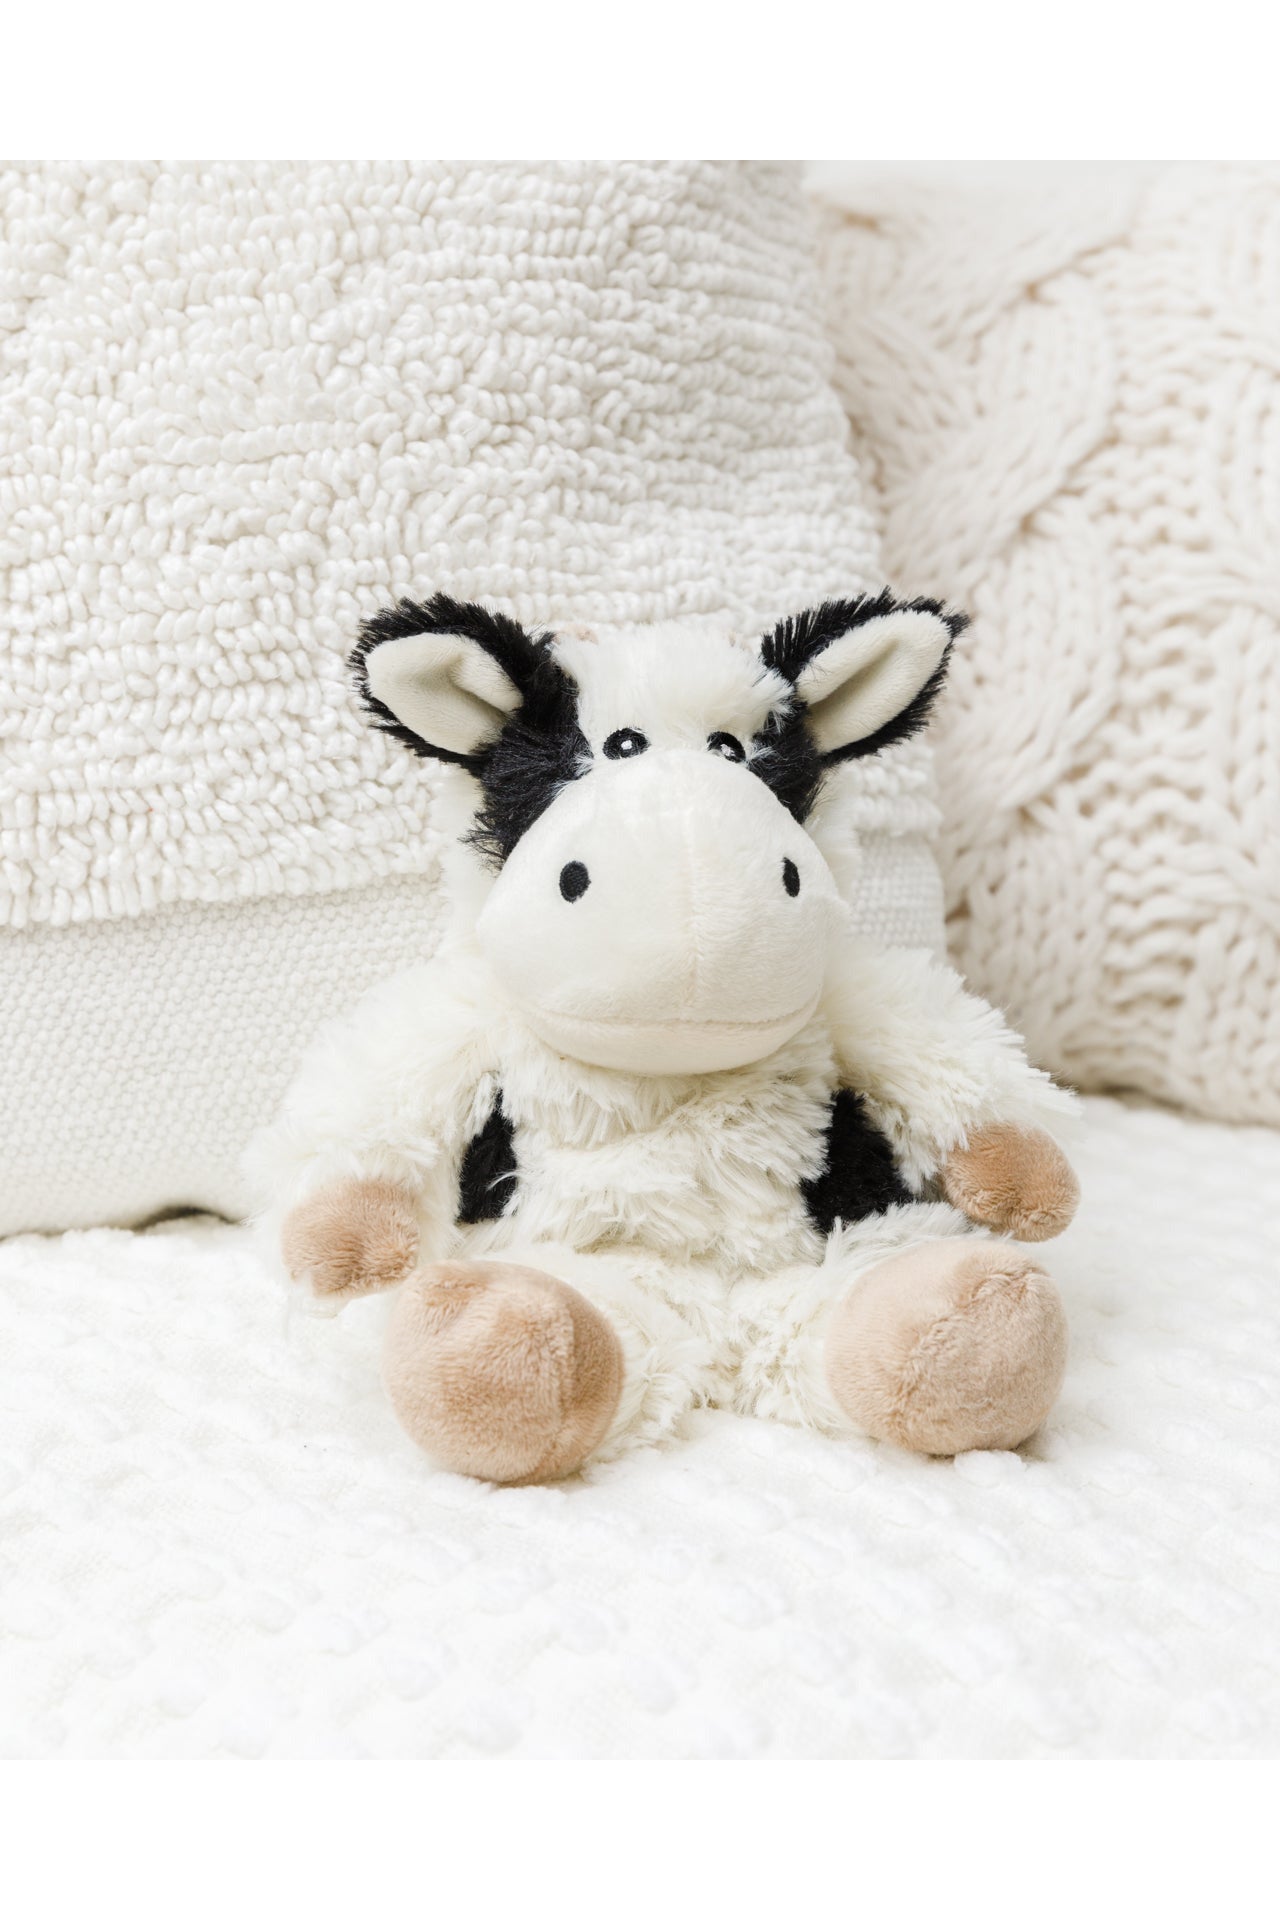 Black and White Cow Warmies Junior